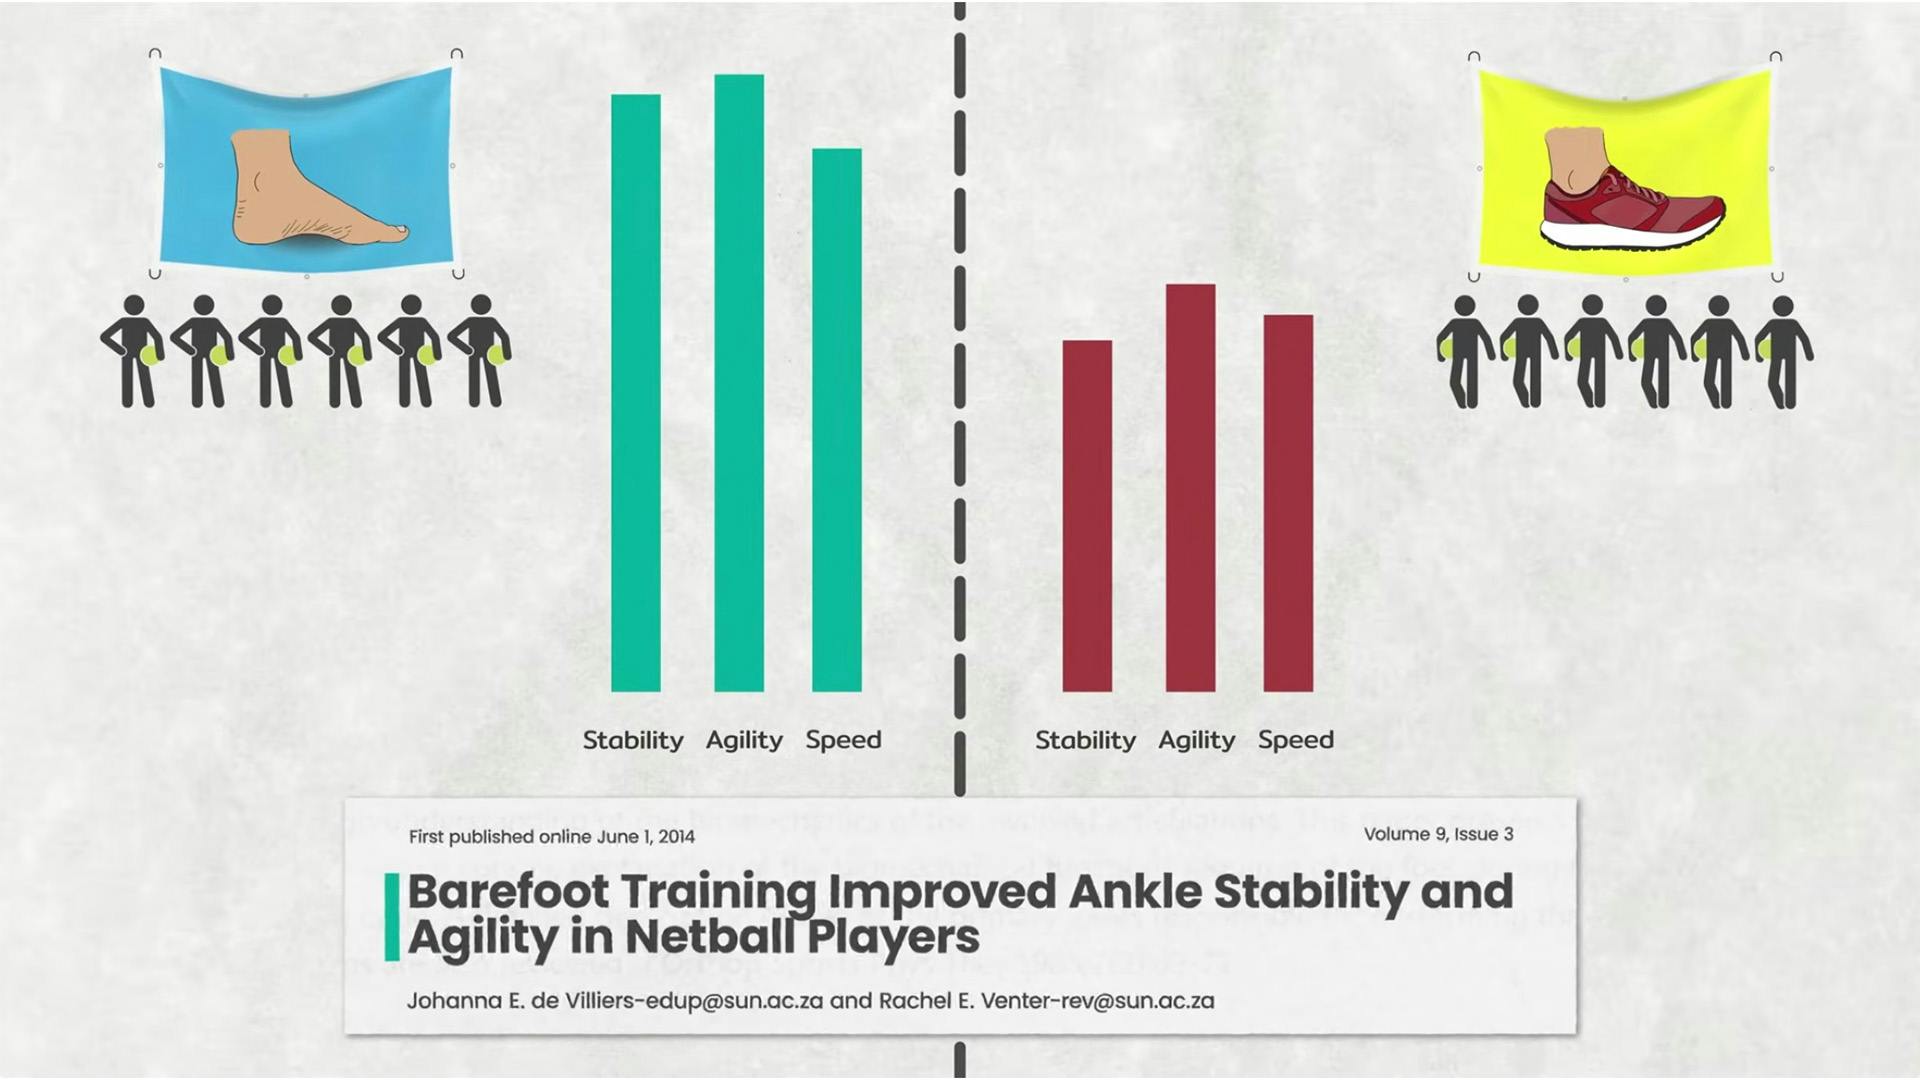 8 Week Barefoot Training Improved Ankle Stability and Agility in Netball Players